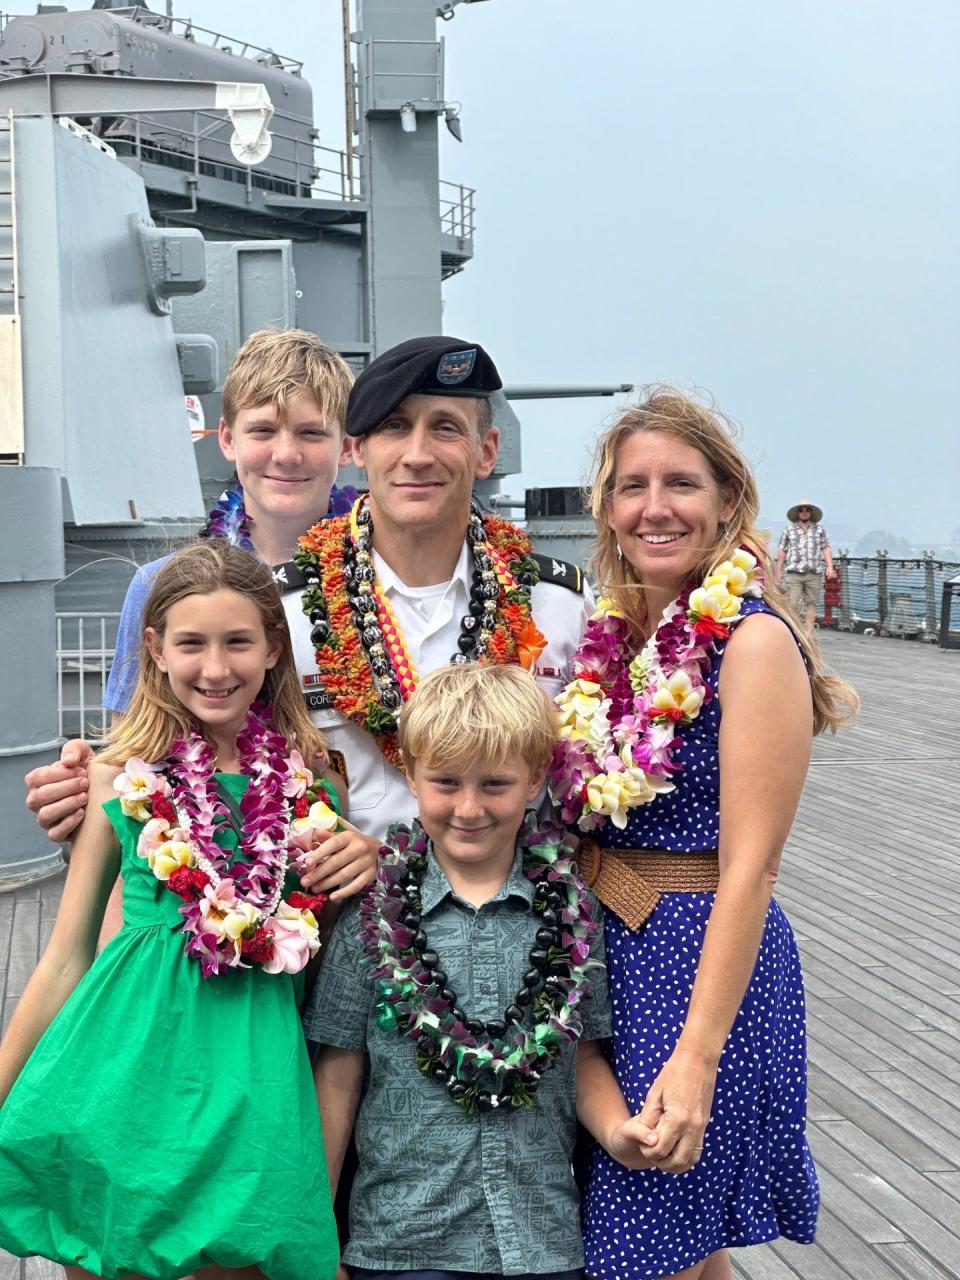 Col. Philip D. Cordaro, a Honesdale native, was promoted to his present rank in the U.S. Army during a ceremony on April 5, 2024, on deck of the USS Missouri at Pearl Harbor. Cordaro is pictured surrounded, from left counterclockwise, by his children, oldest son Luca, daughter Aida and younger son Antonio, and his wife, Sarah. He is presently stationed in Hawaii.